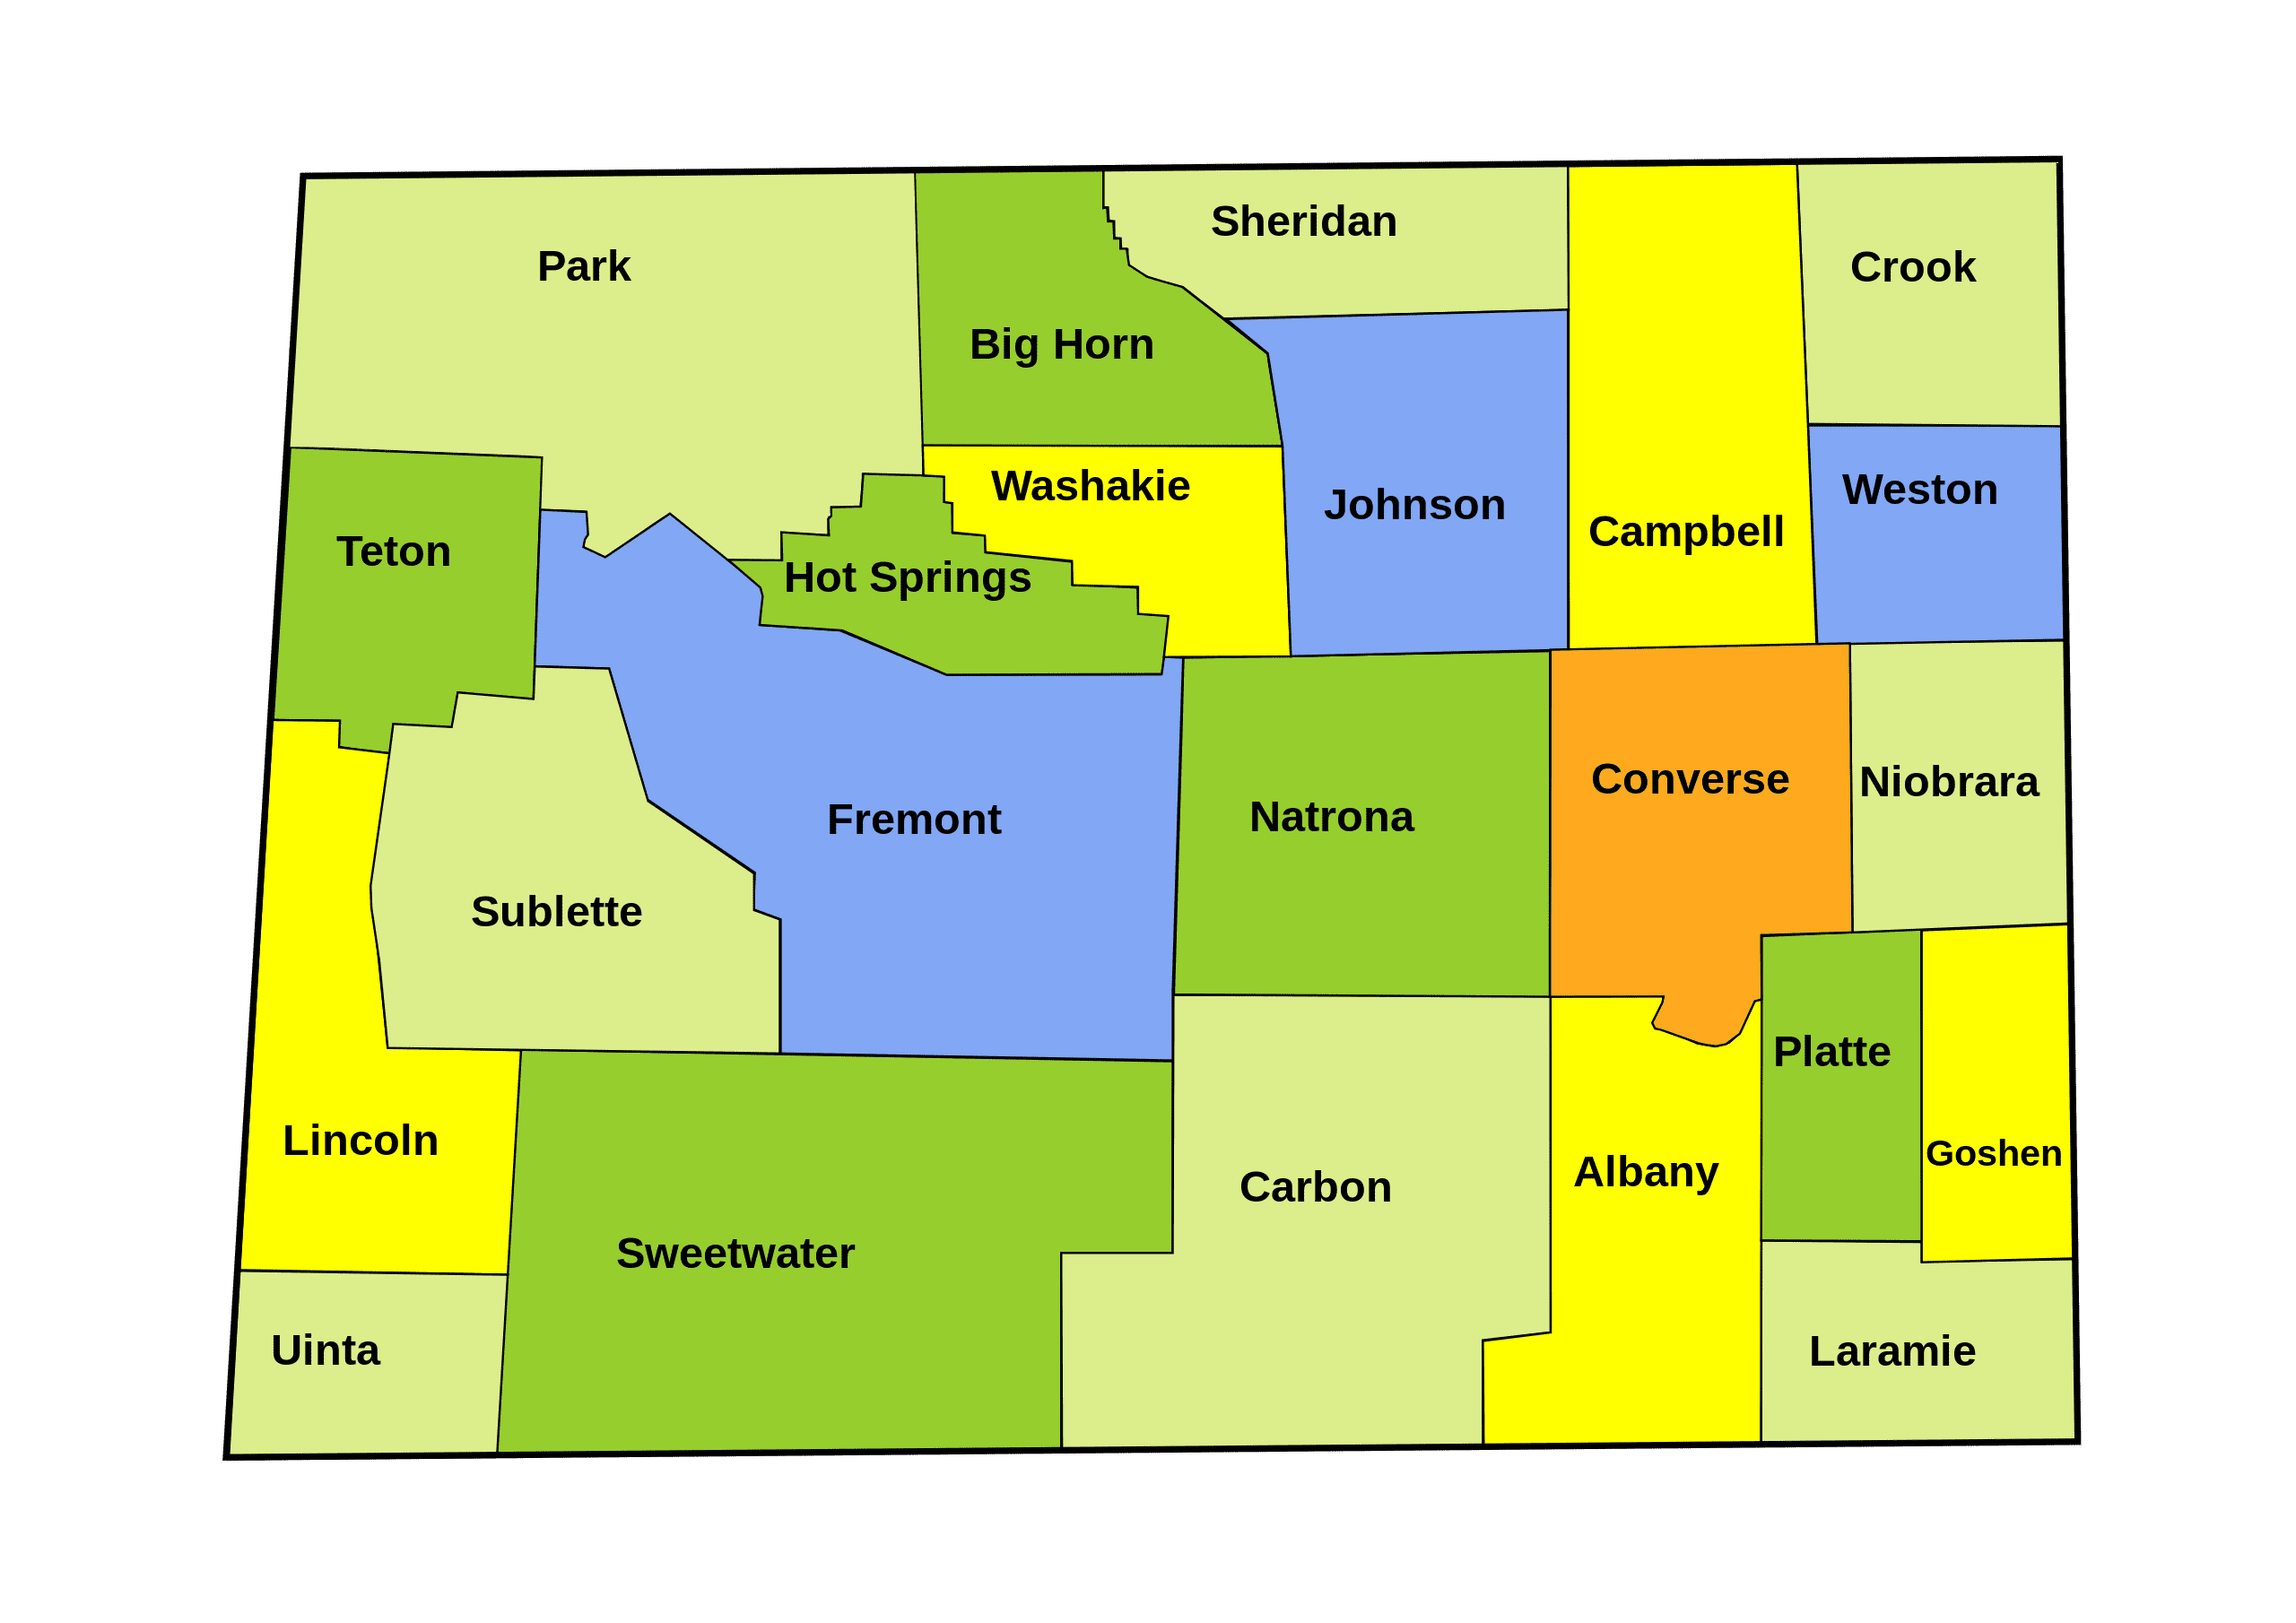 Map of Wyoming counties, helpful to locate the current Wyoming wildfire.